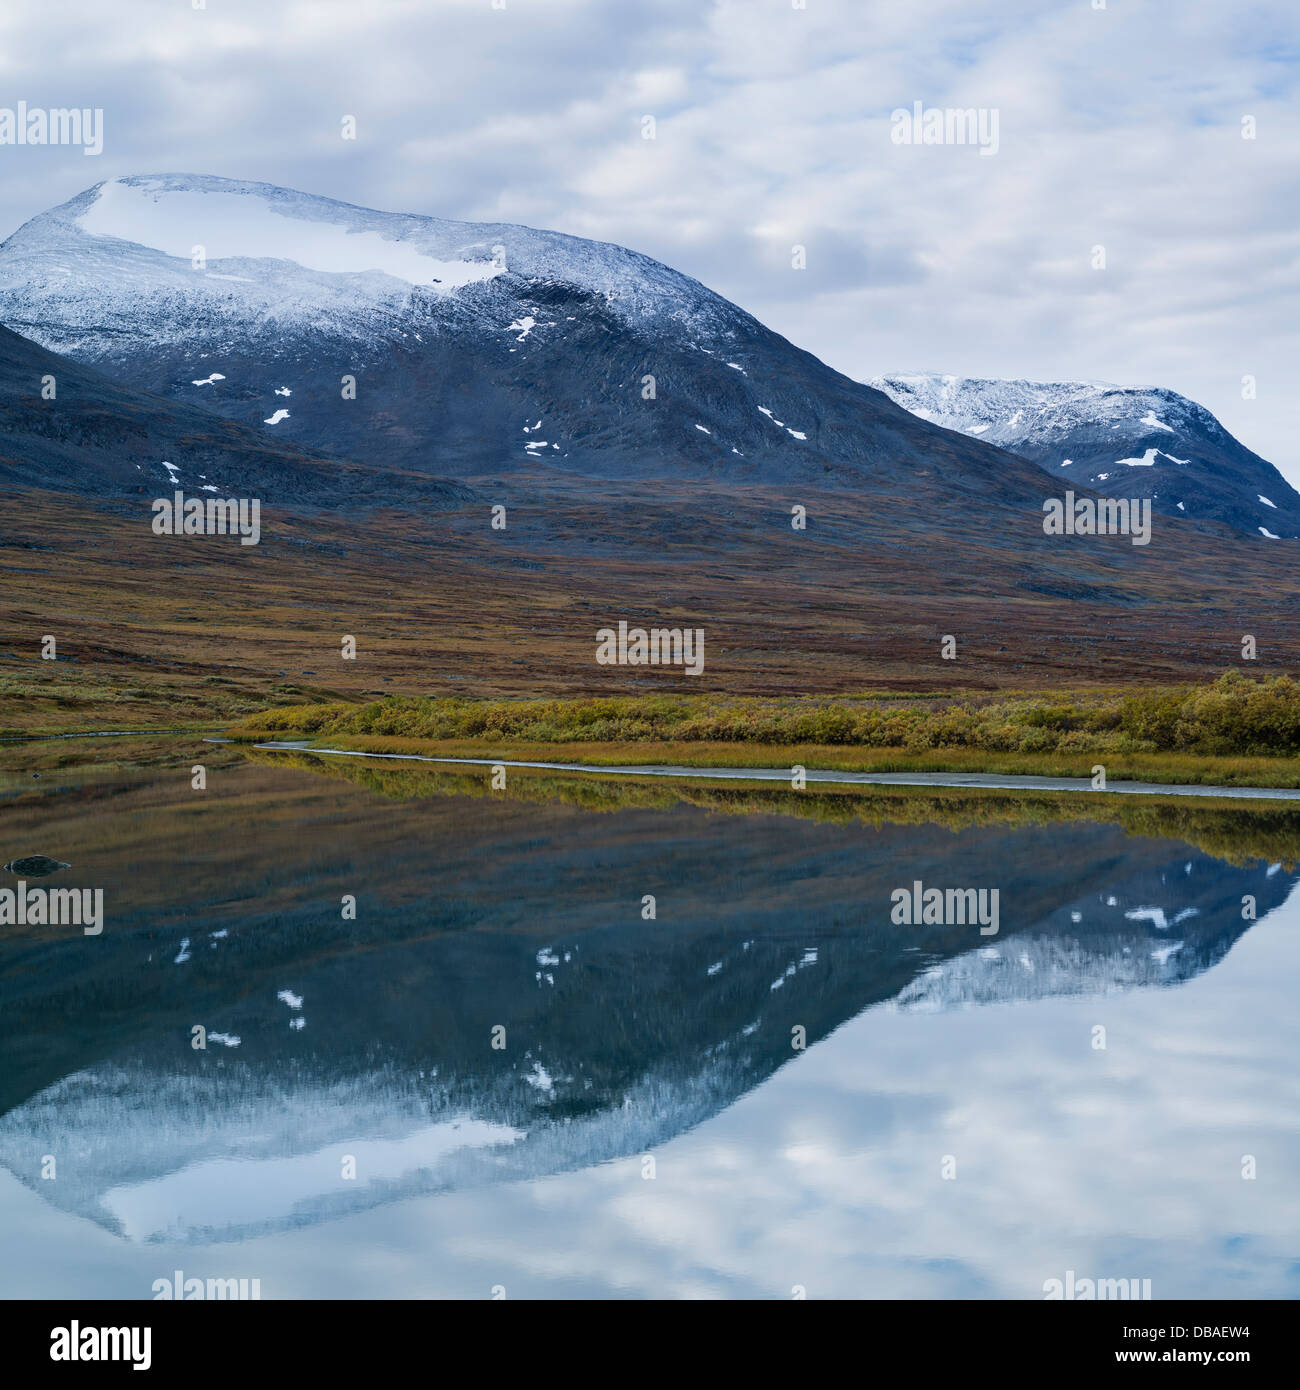 Autumn mountain reflection in river, Alisvagge from near Alesjaure mountain hut, Kungsleden trail, Lappland, Sweden Stock Photo